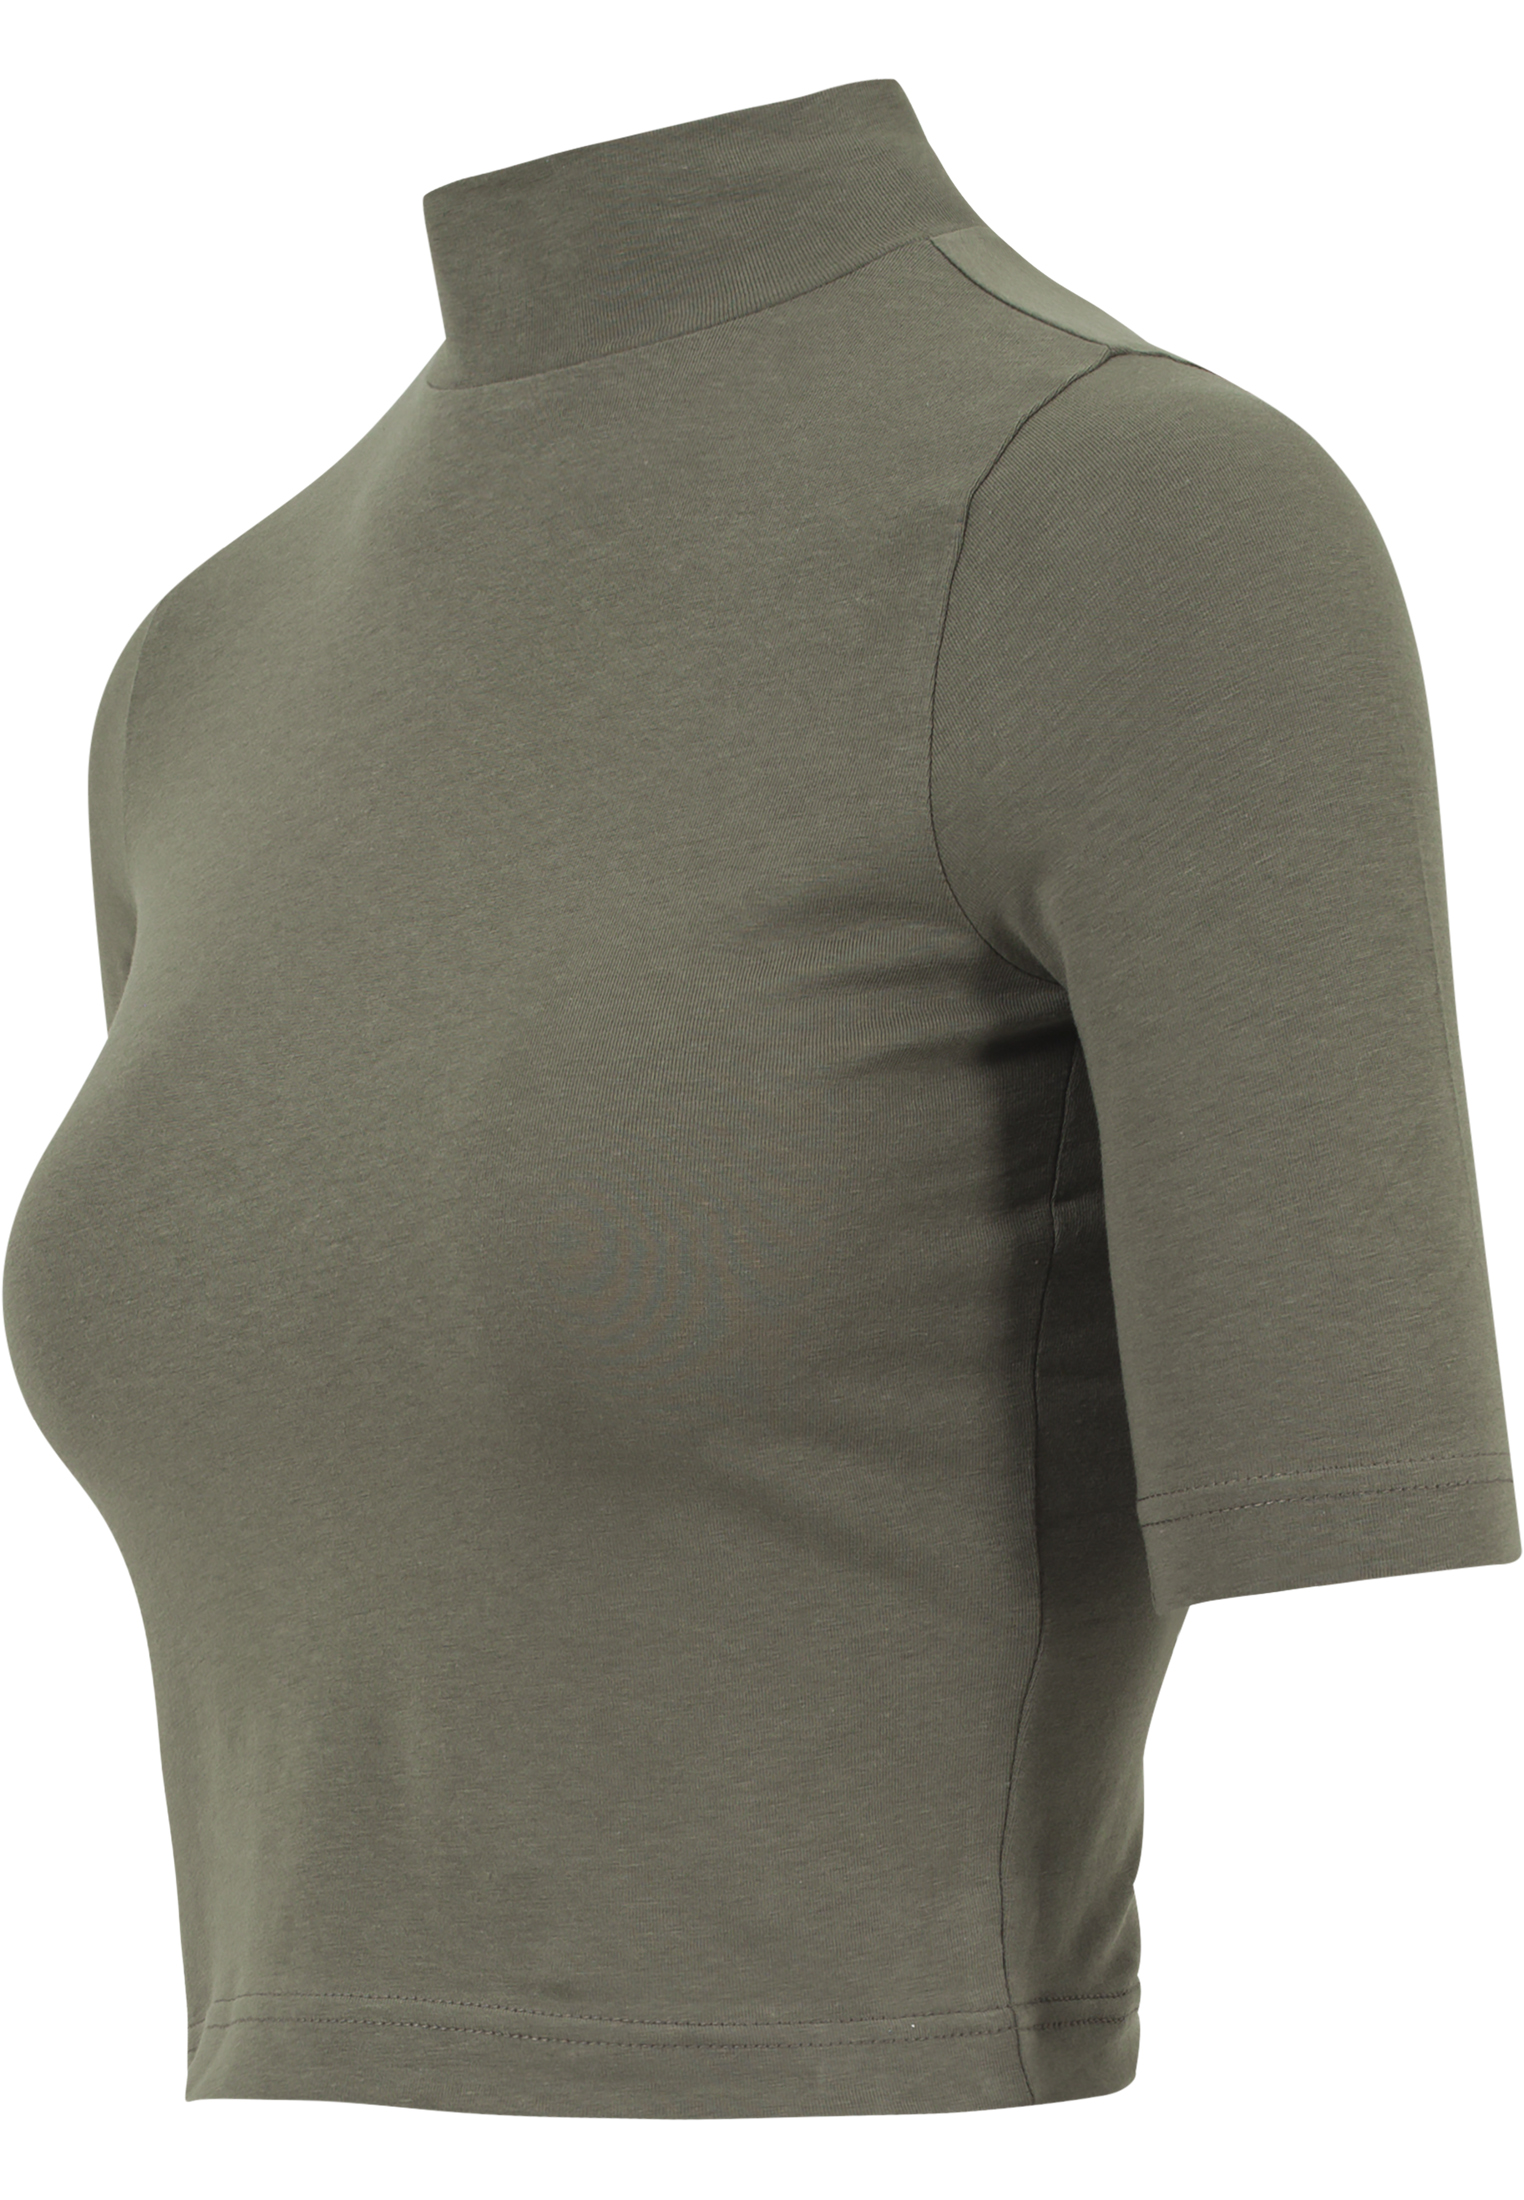 Cropped Tees Ladies Cropped Turtleneck Tee in Farbe olive